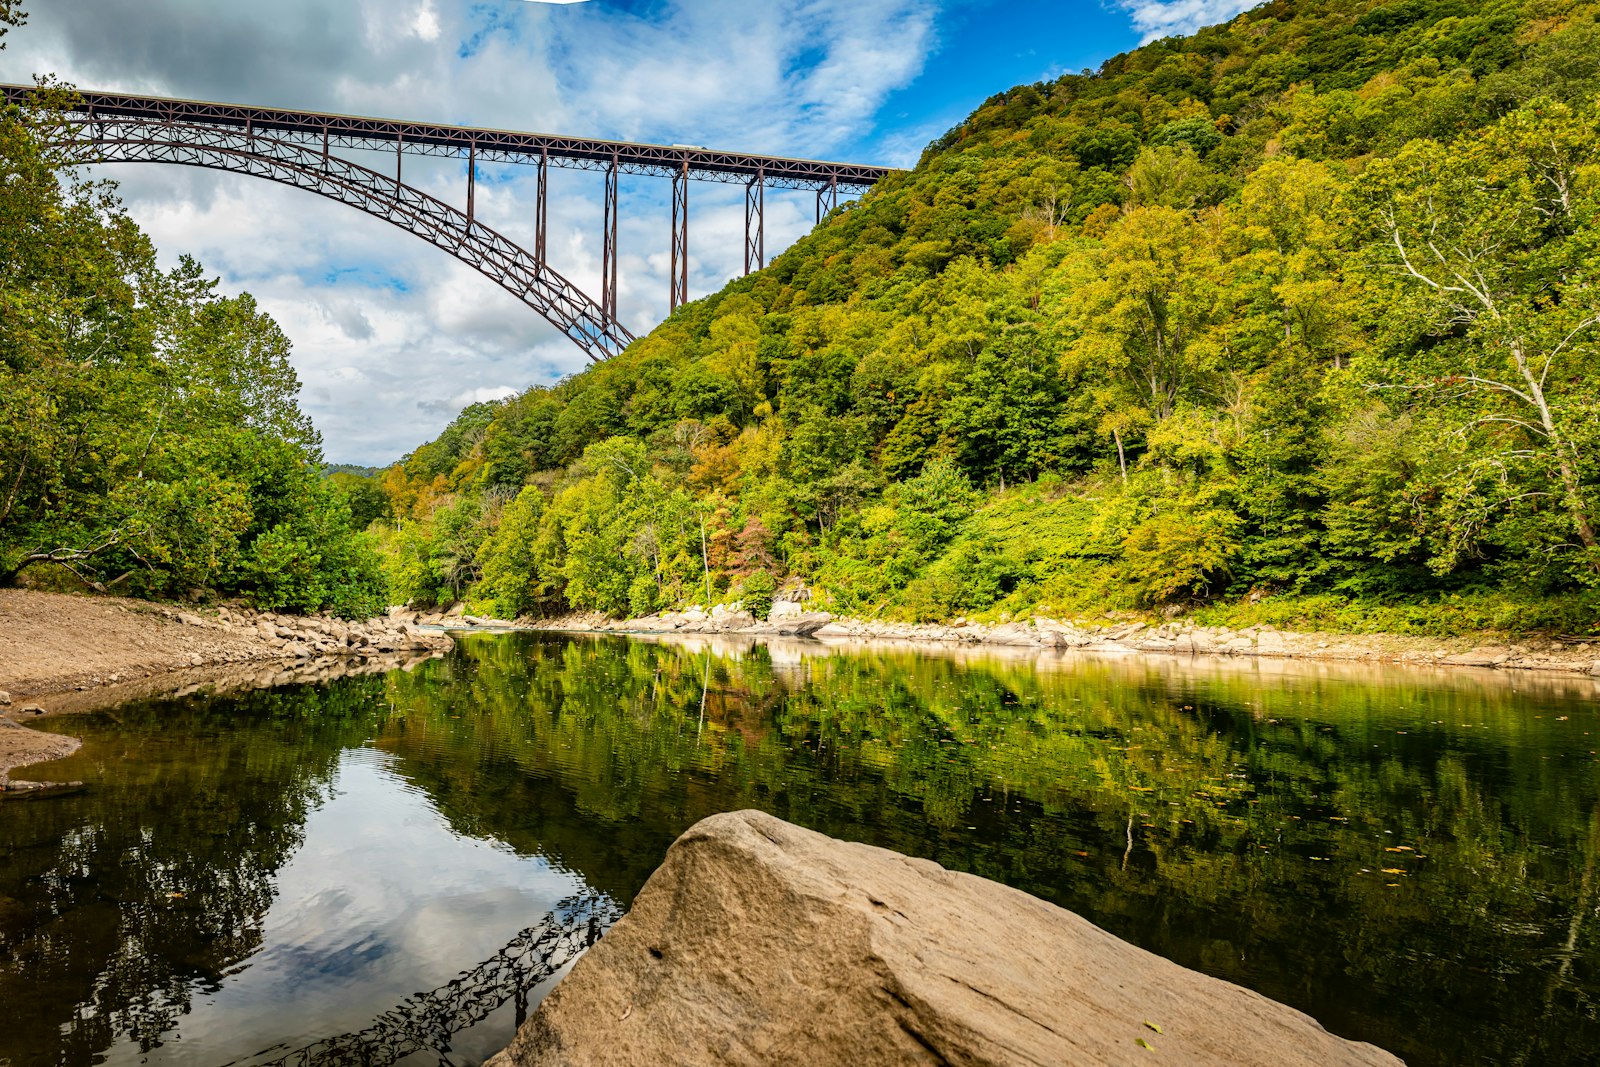 A rock sits in the foreground at the edge of a still river. In the distance, a large elevated steel bridge connects two mountaintops